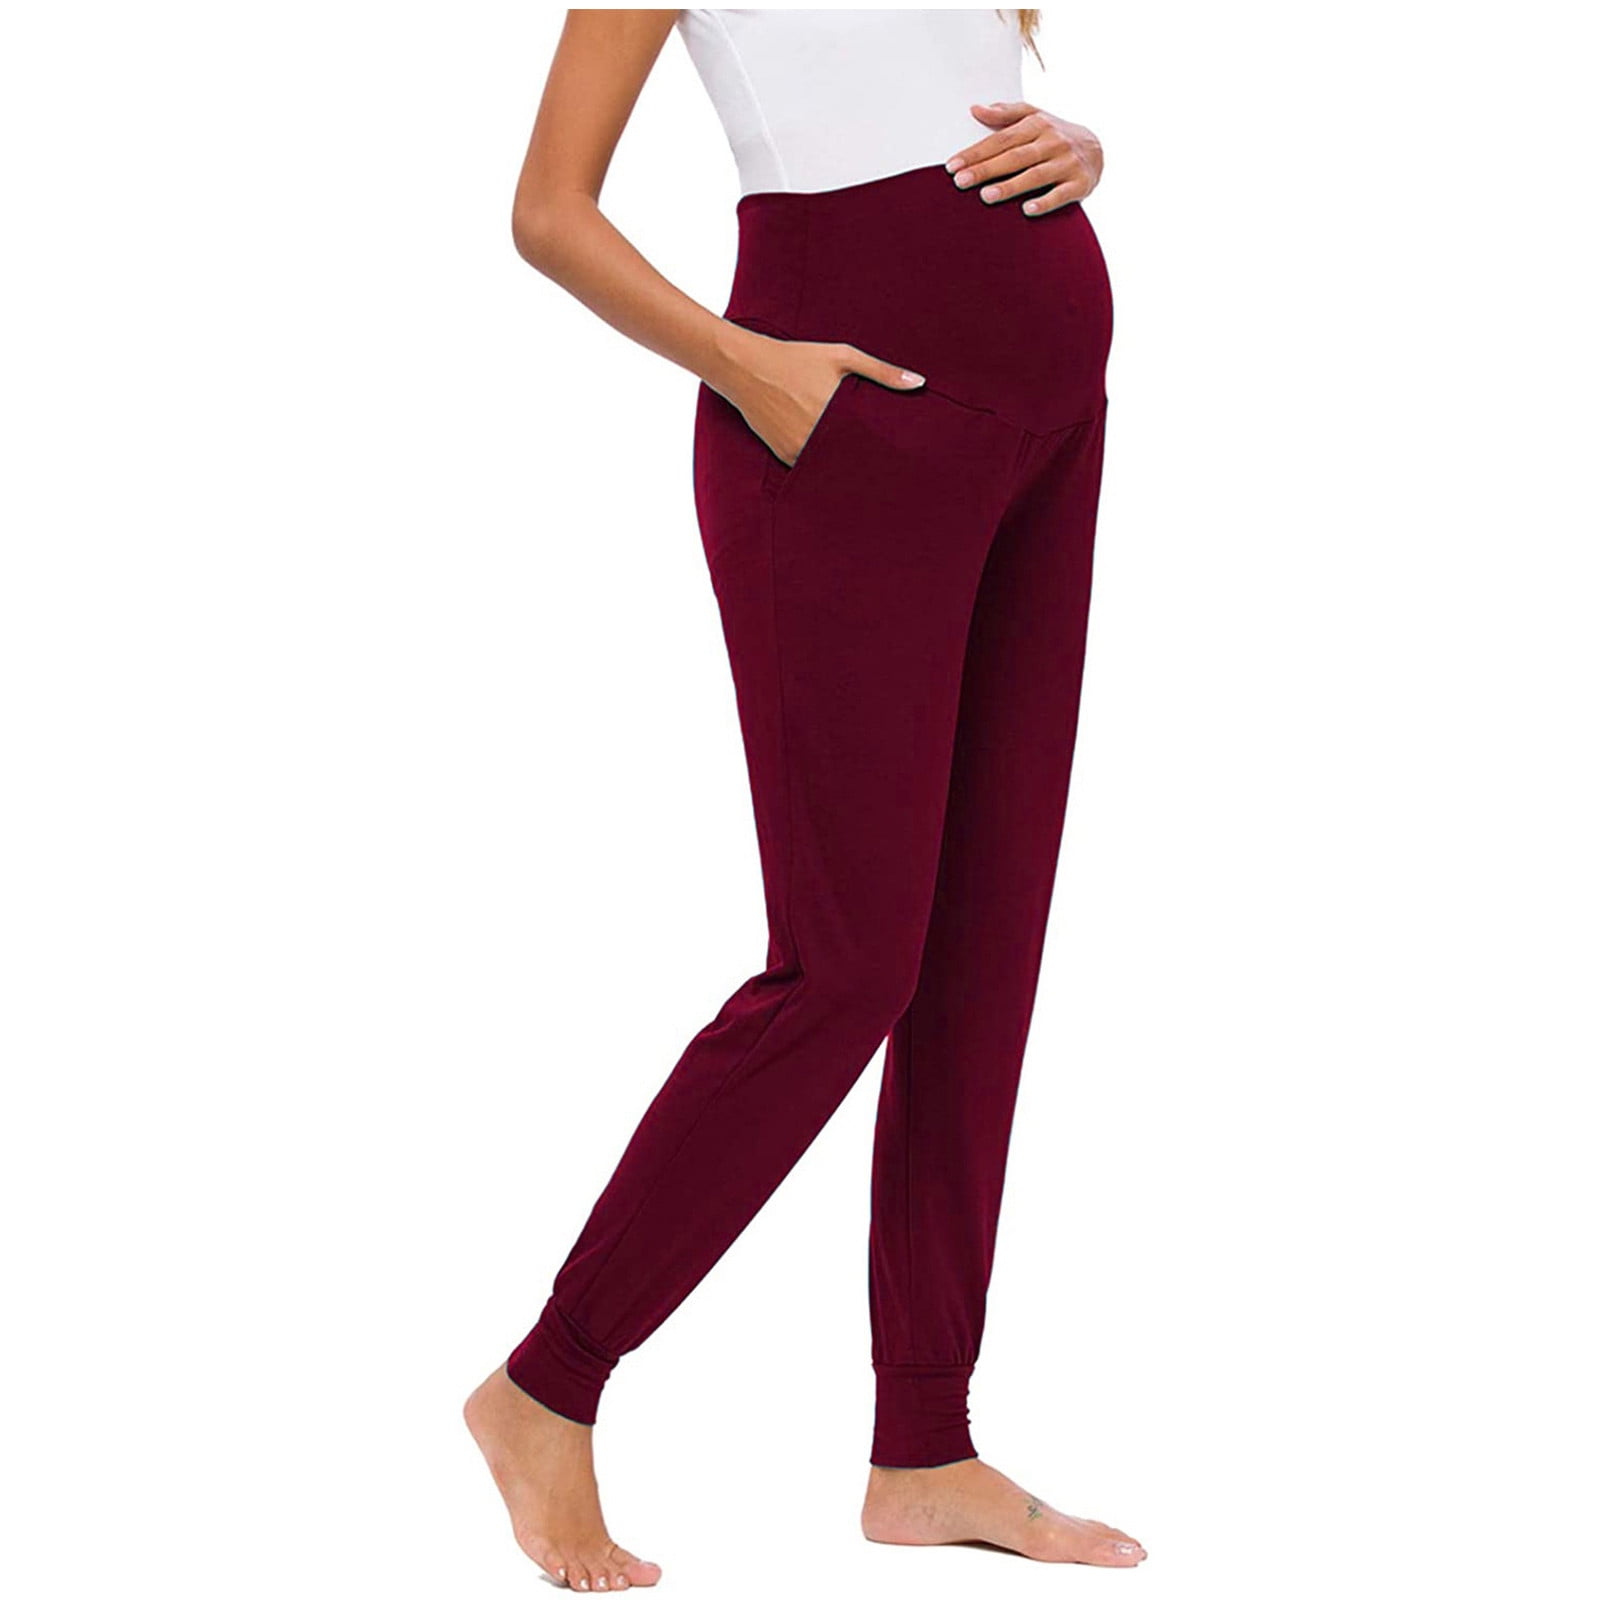 BUIgtTklOP Pants for Women Clearance Women's Casual Temperament Solid ...